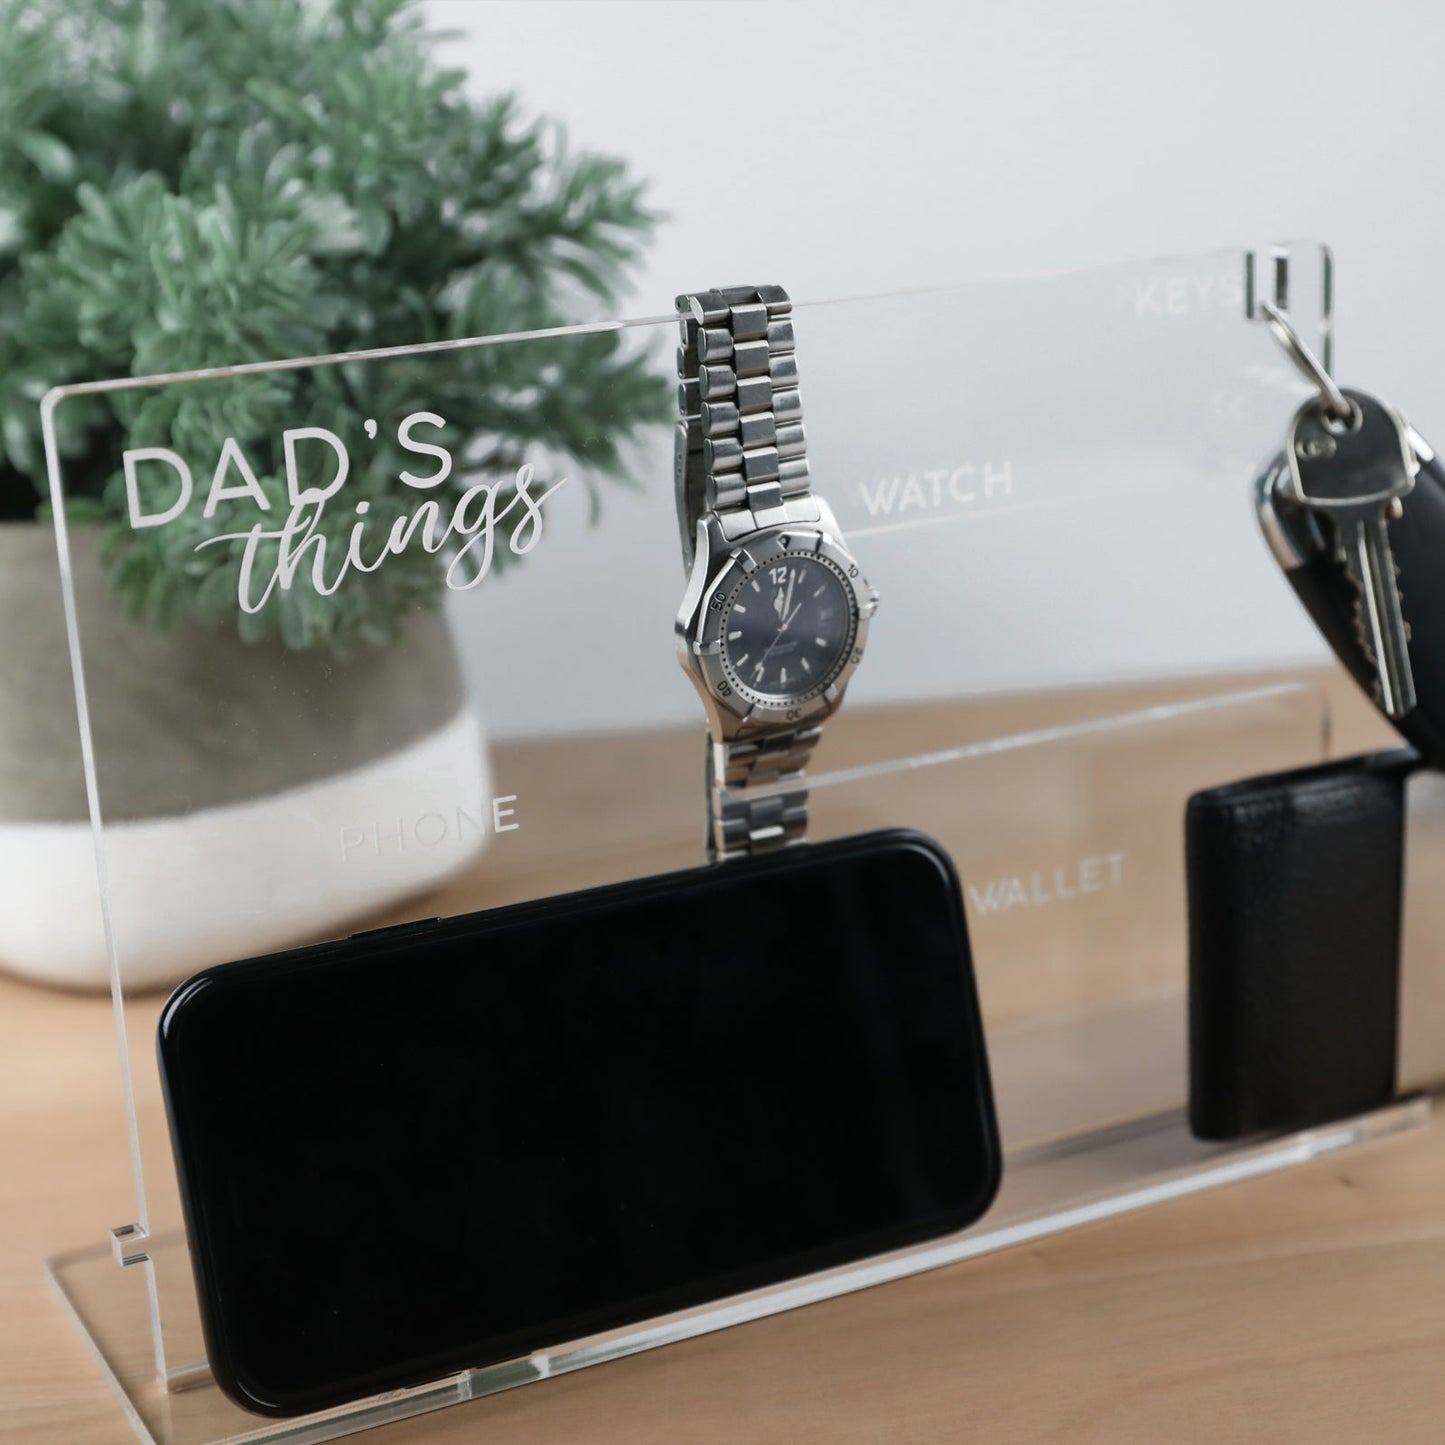 Ultimate accessory set for each dad